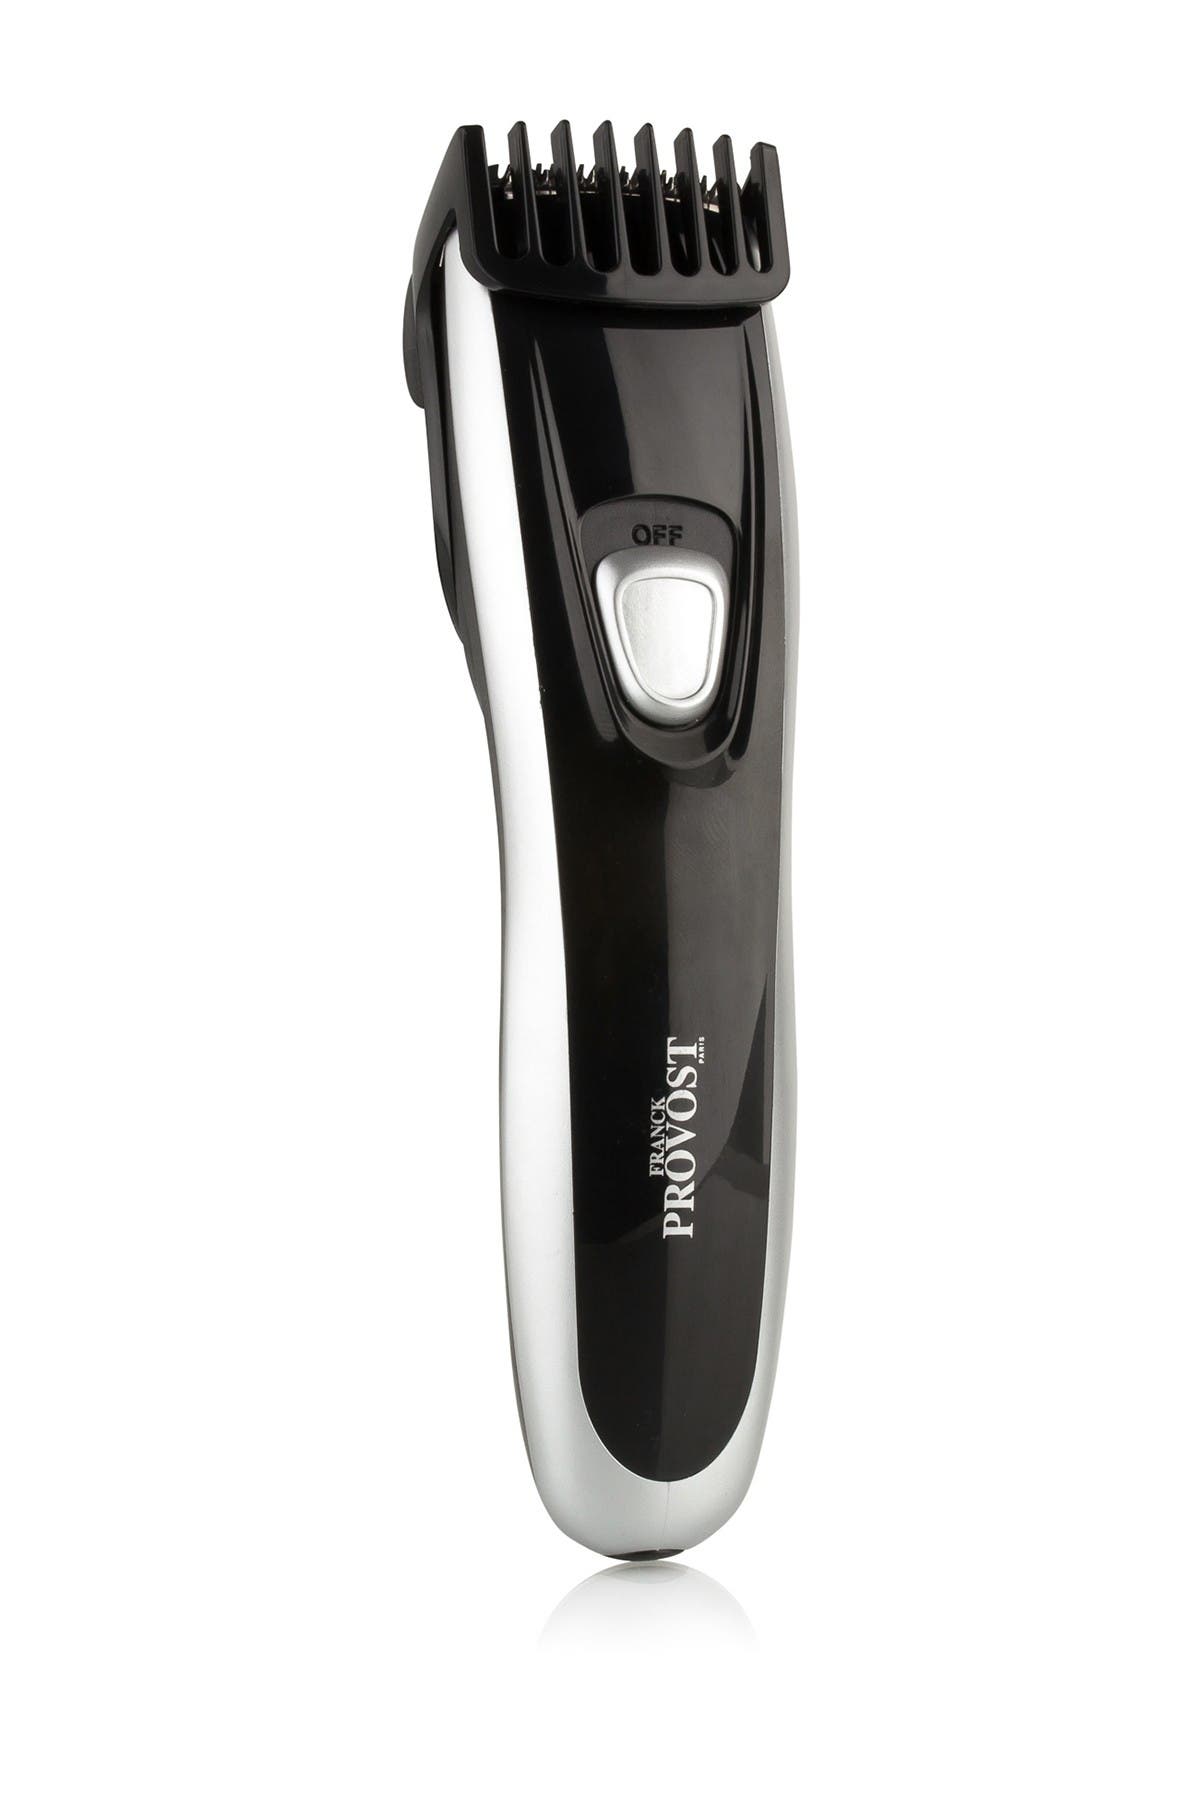 bald shaving clippers